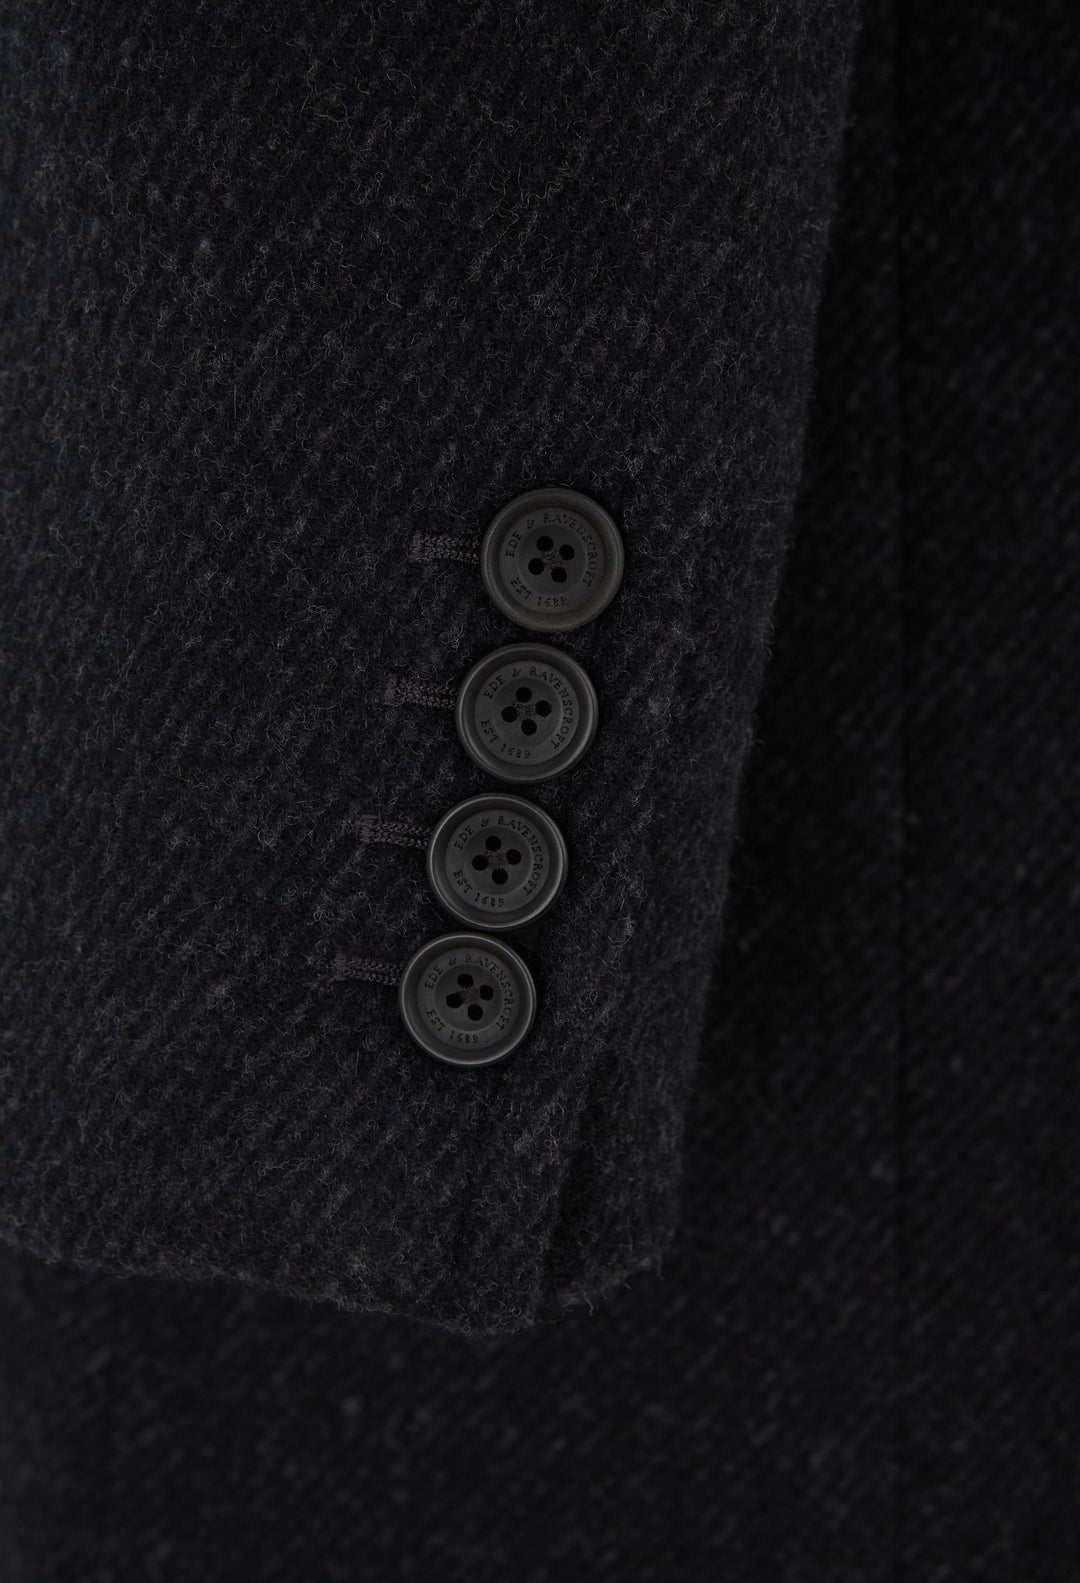 Warrington Charcoal Twill Wool and Cashmere Coat